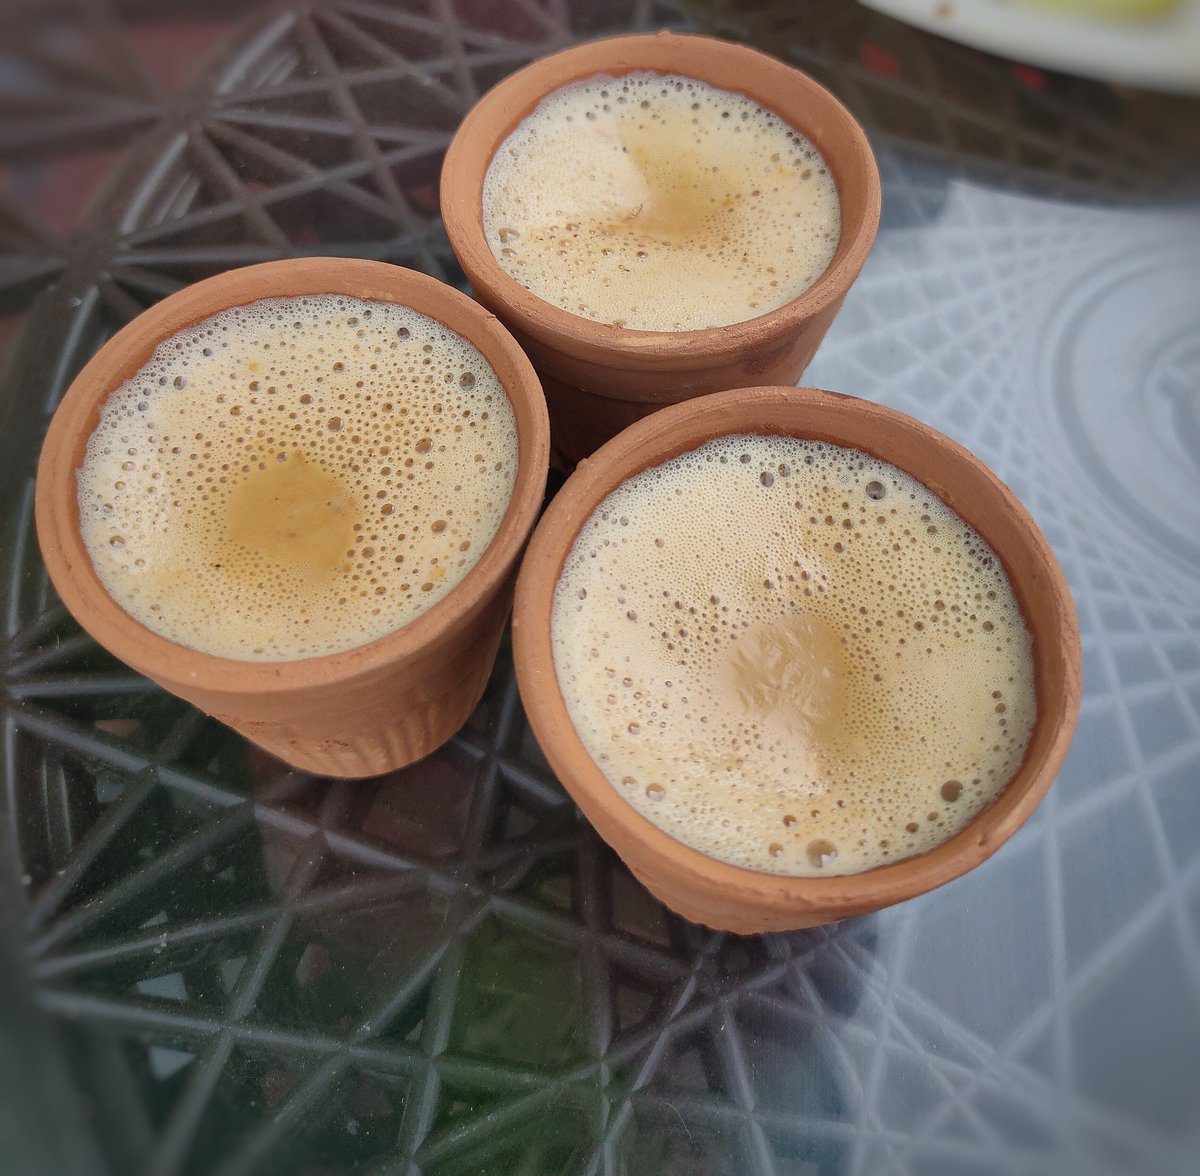 Rainy days in Karachi bring a rare magic to the city! Streets washed anew and chai even more delightful. 🌧️☕ #KarachiRain